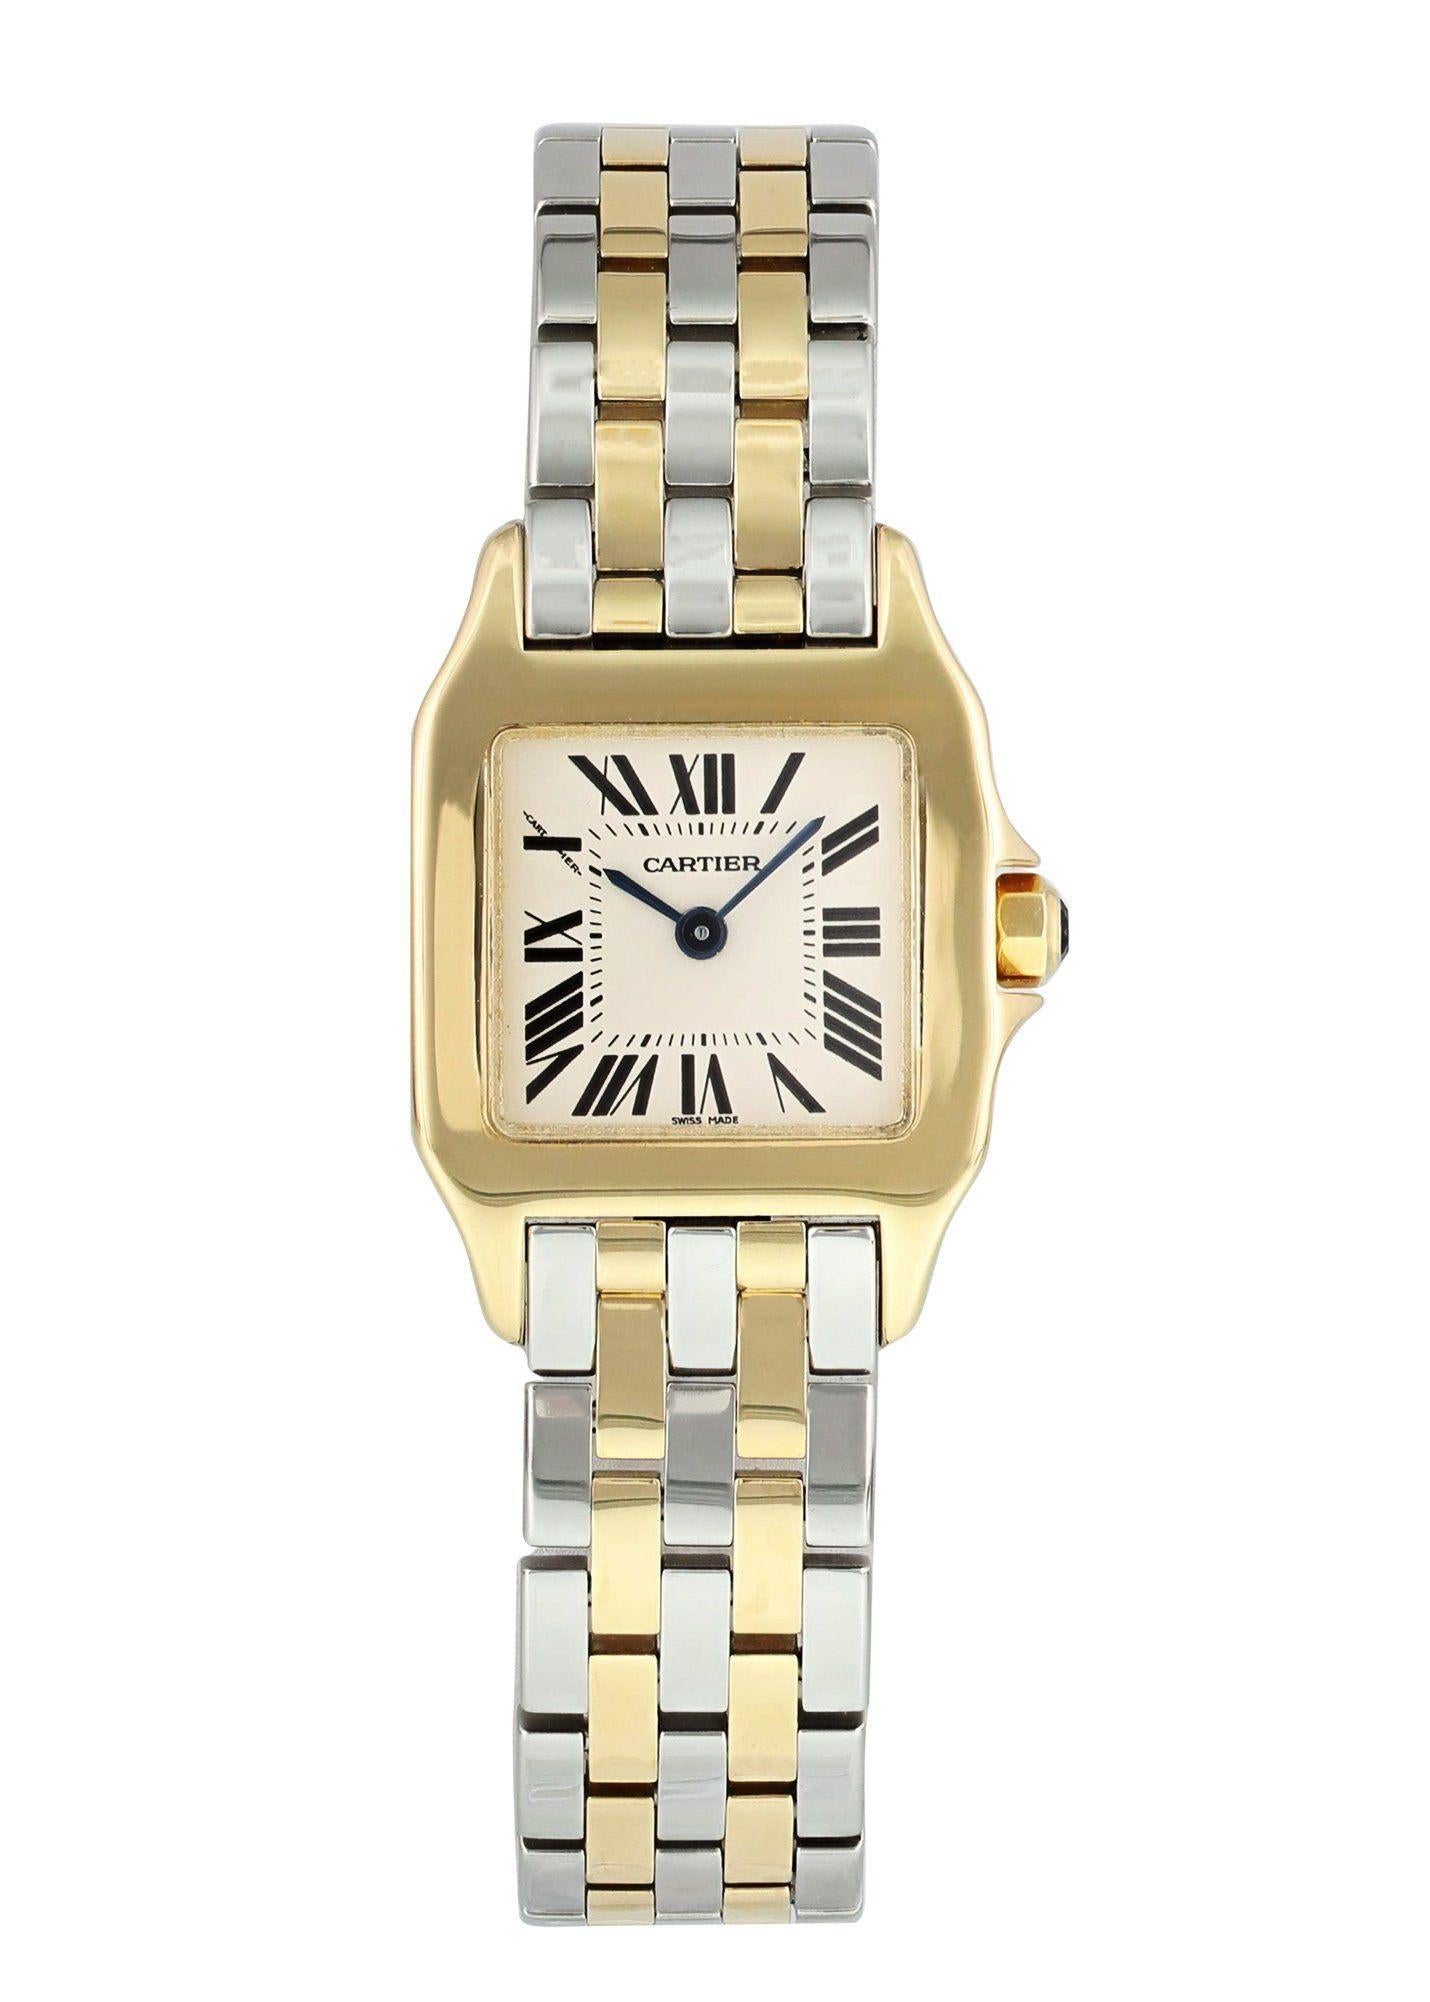 Cartier Santos Demoiselle 2699 Ladies Watch.
20mm 18k Yellow Gold case. 
Yellow Gold Stationary bezel. 
Off-White dial with Blue steel hands and Roman numeral hour markers. 
Minute markers on the inner dial. 
Stainless Steel Two-tone Bracelet with